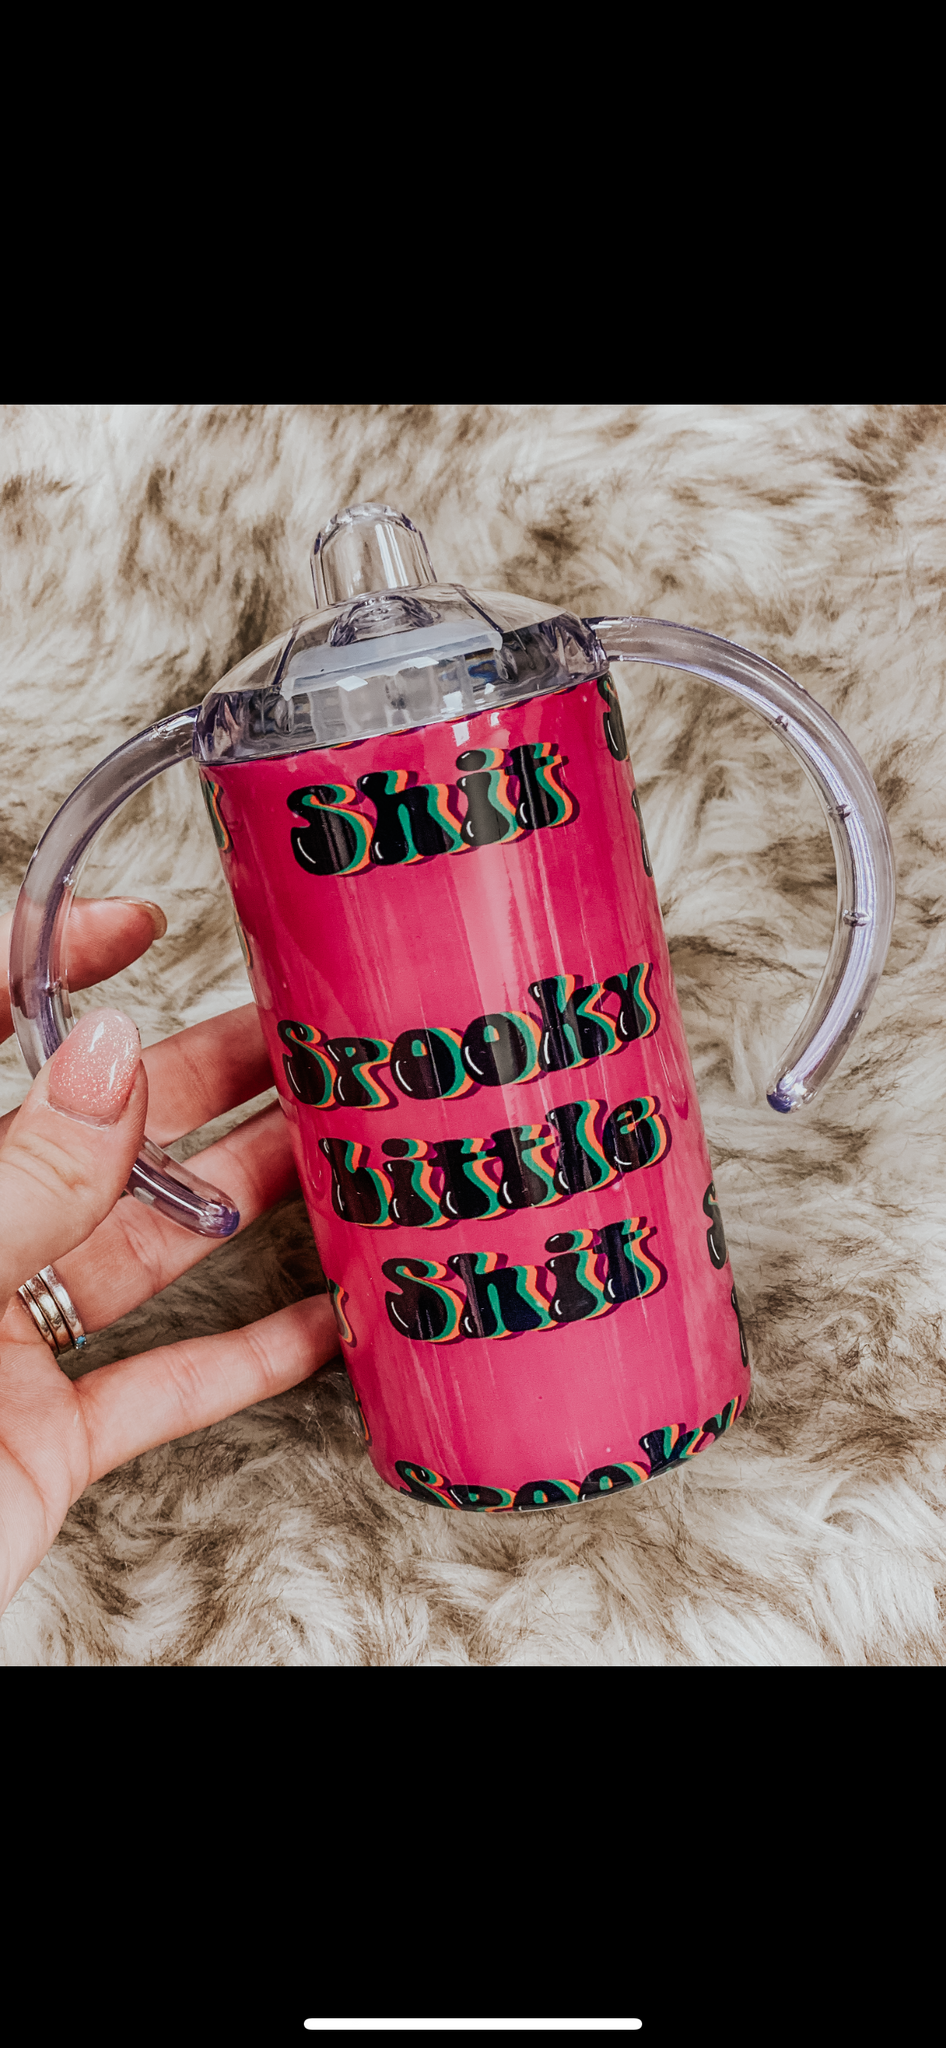 Spooky Little Sh*t Sippy + toddler cup + Tumbler